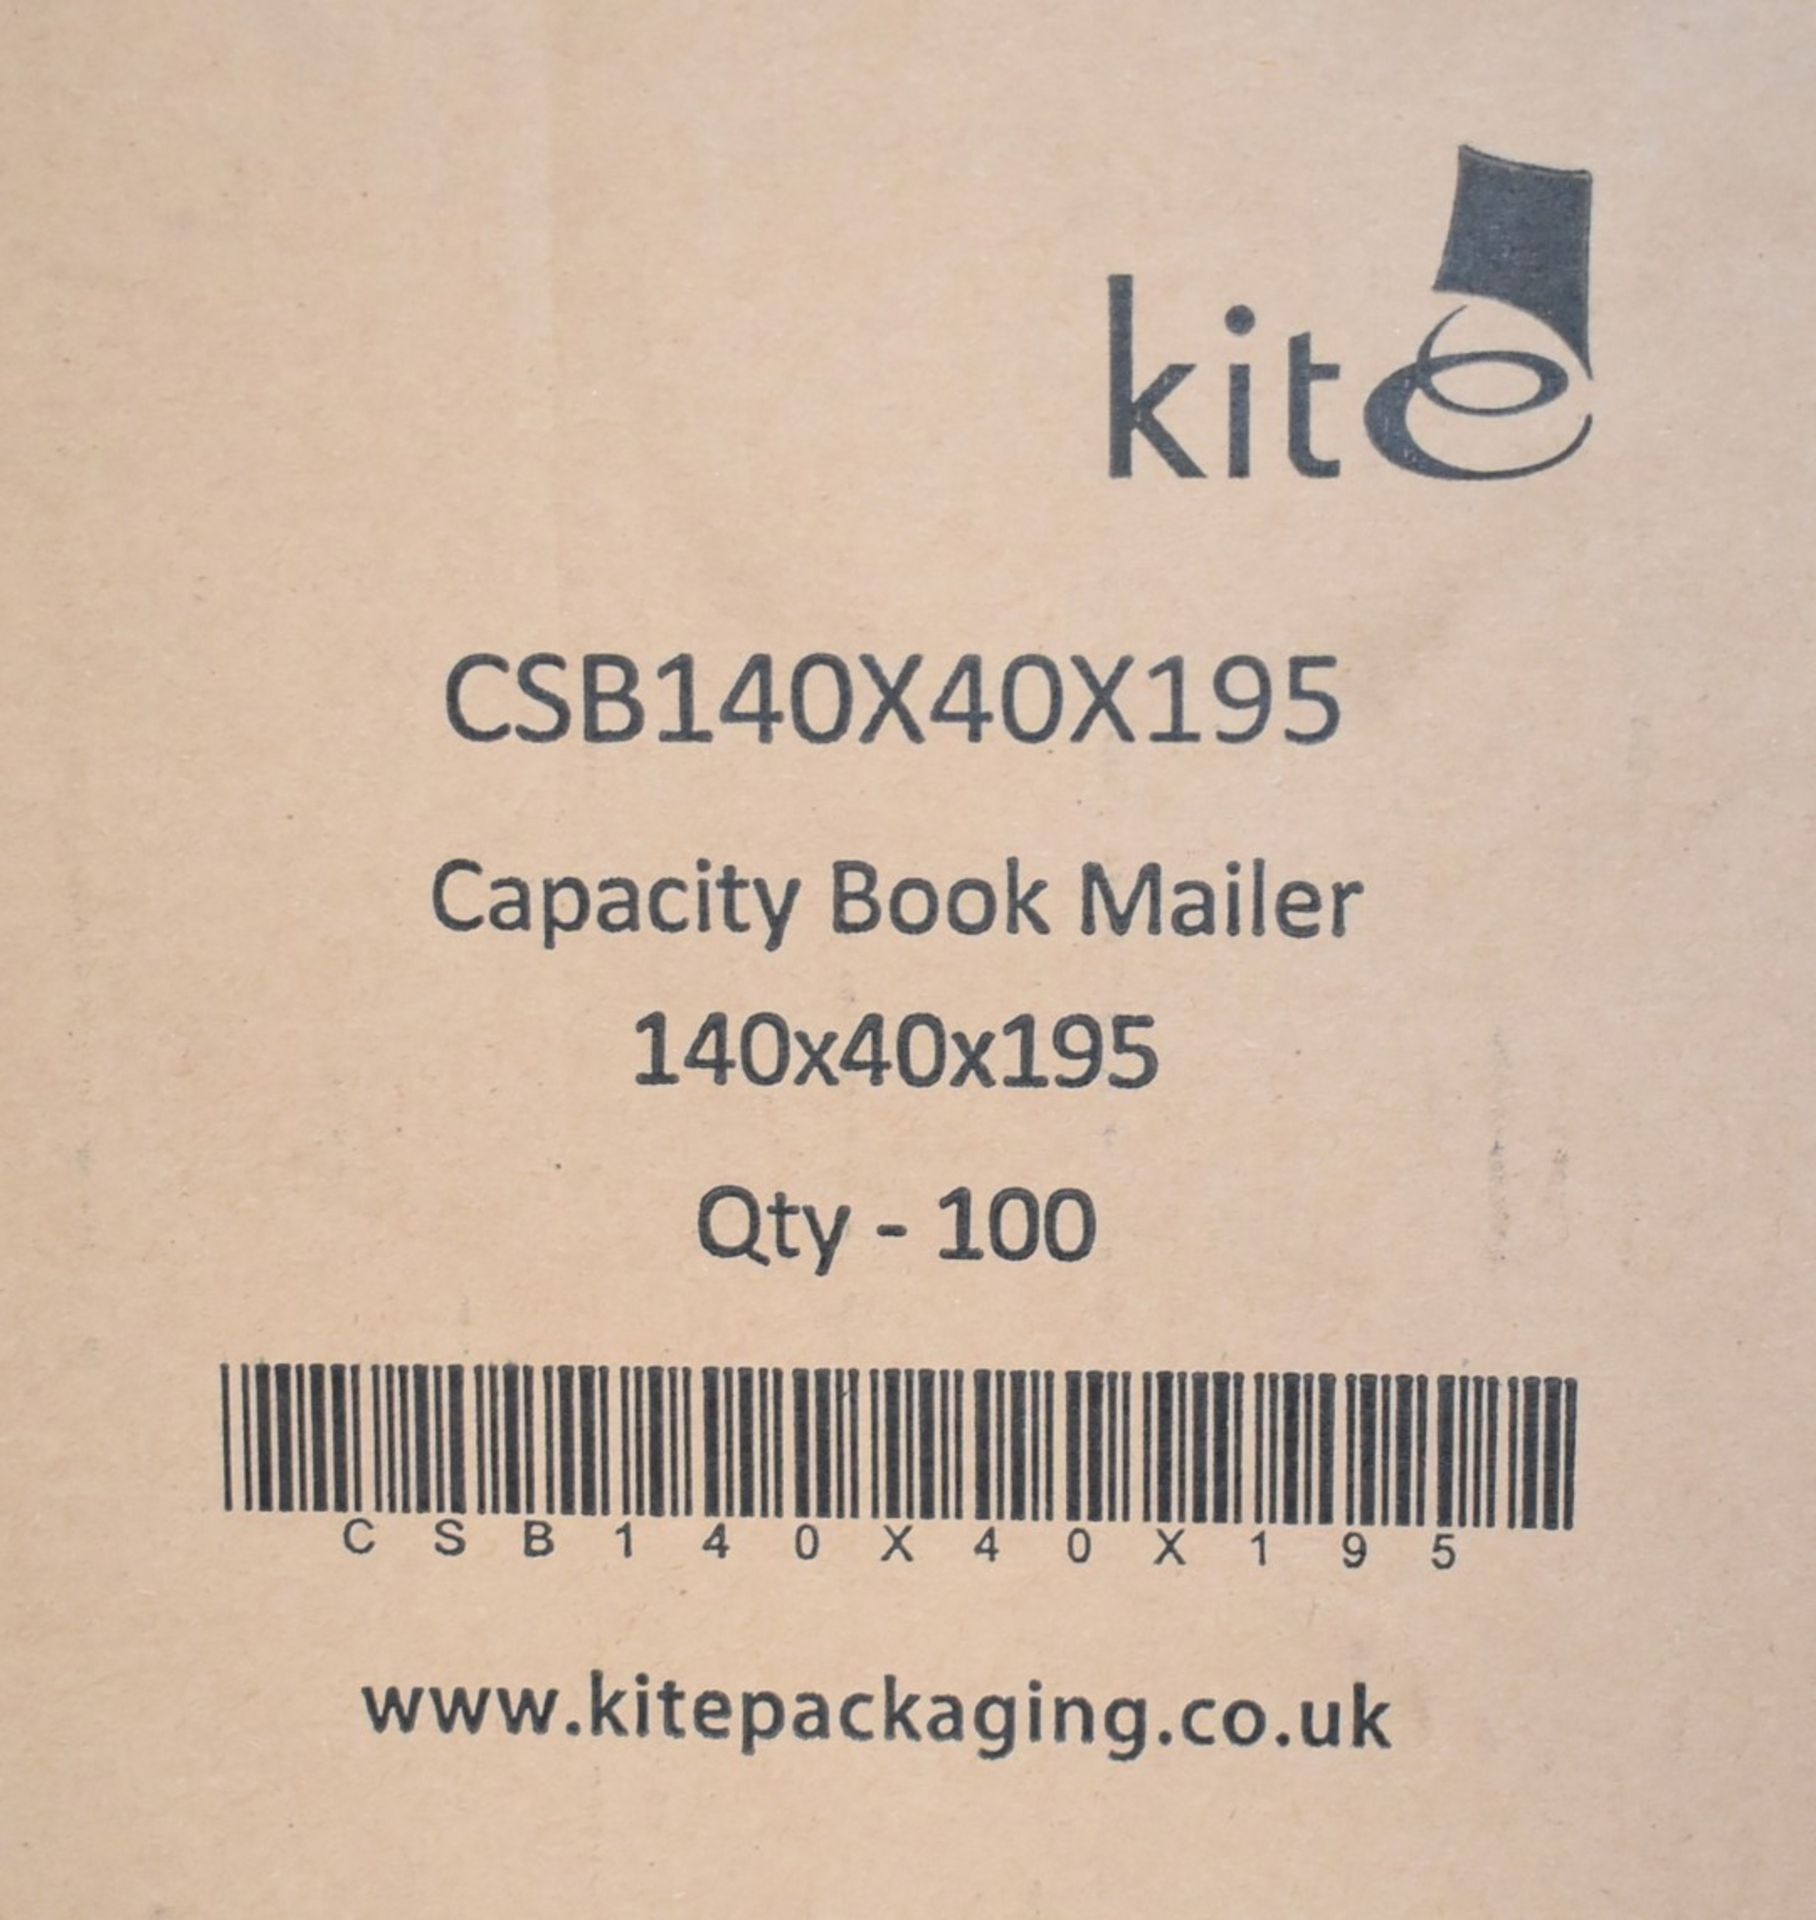 200 x Capacity Book Mailer Cardboard Envelopes - Size: 140 x 140 x 195mm - Includes 2 x Boxes of 100 - Image 5 of 6